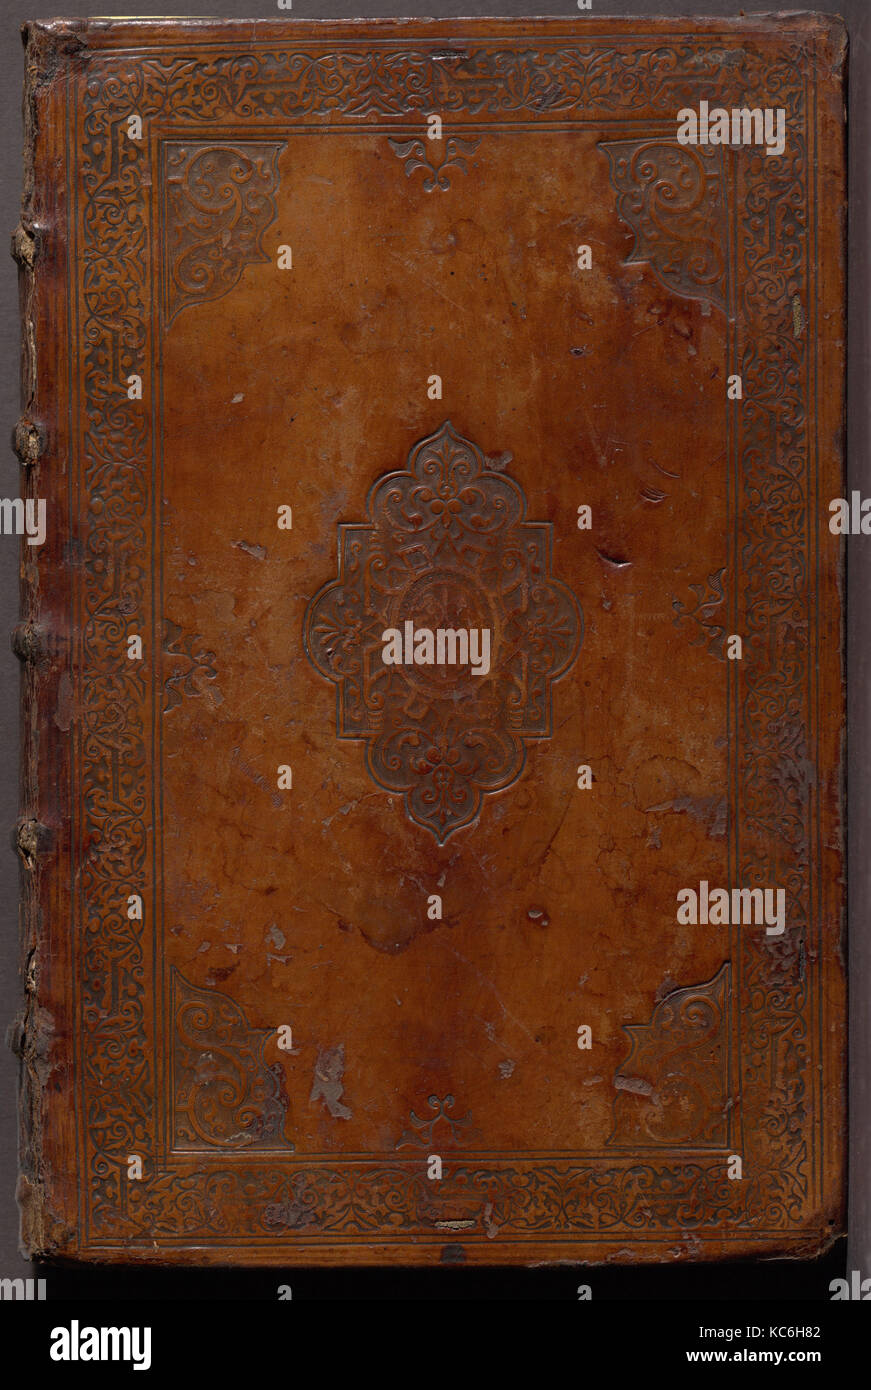 Manuscript Inventory of the Armory of a Castle of a Nobleman, 16th century Stock Photo